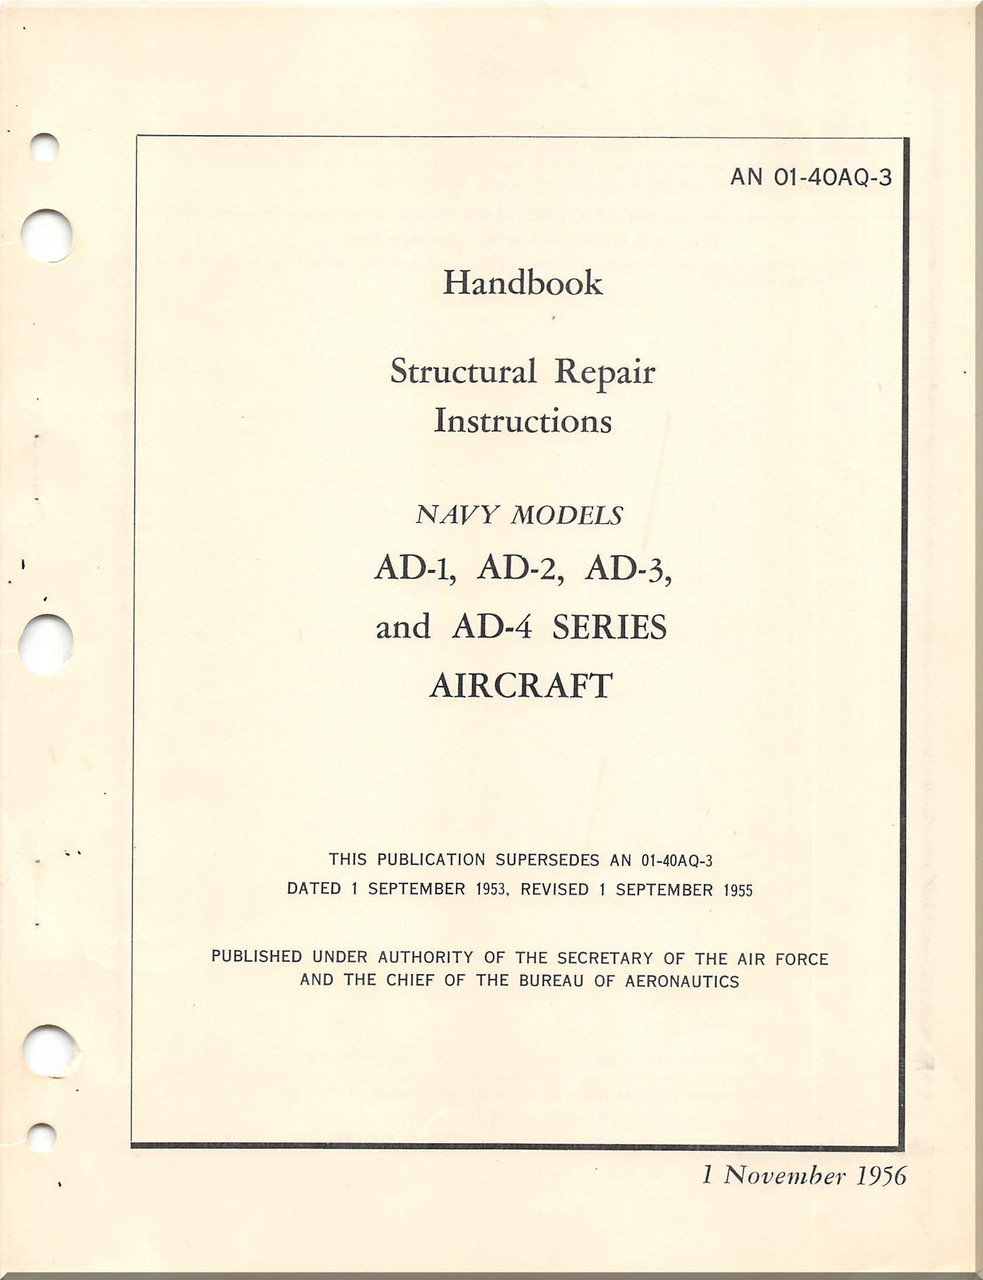 Mc Donnell Douglas AD-1 , -2 , -3, , -4, Aircraft Structural Repair Manual  - AN 01-40AQ-3 - 1956 - Aircraft Reports - Aircraft Manuals - Aircraft  Helicopter Engines Propellers Blueprints Publications